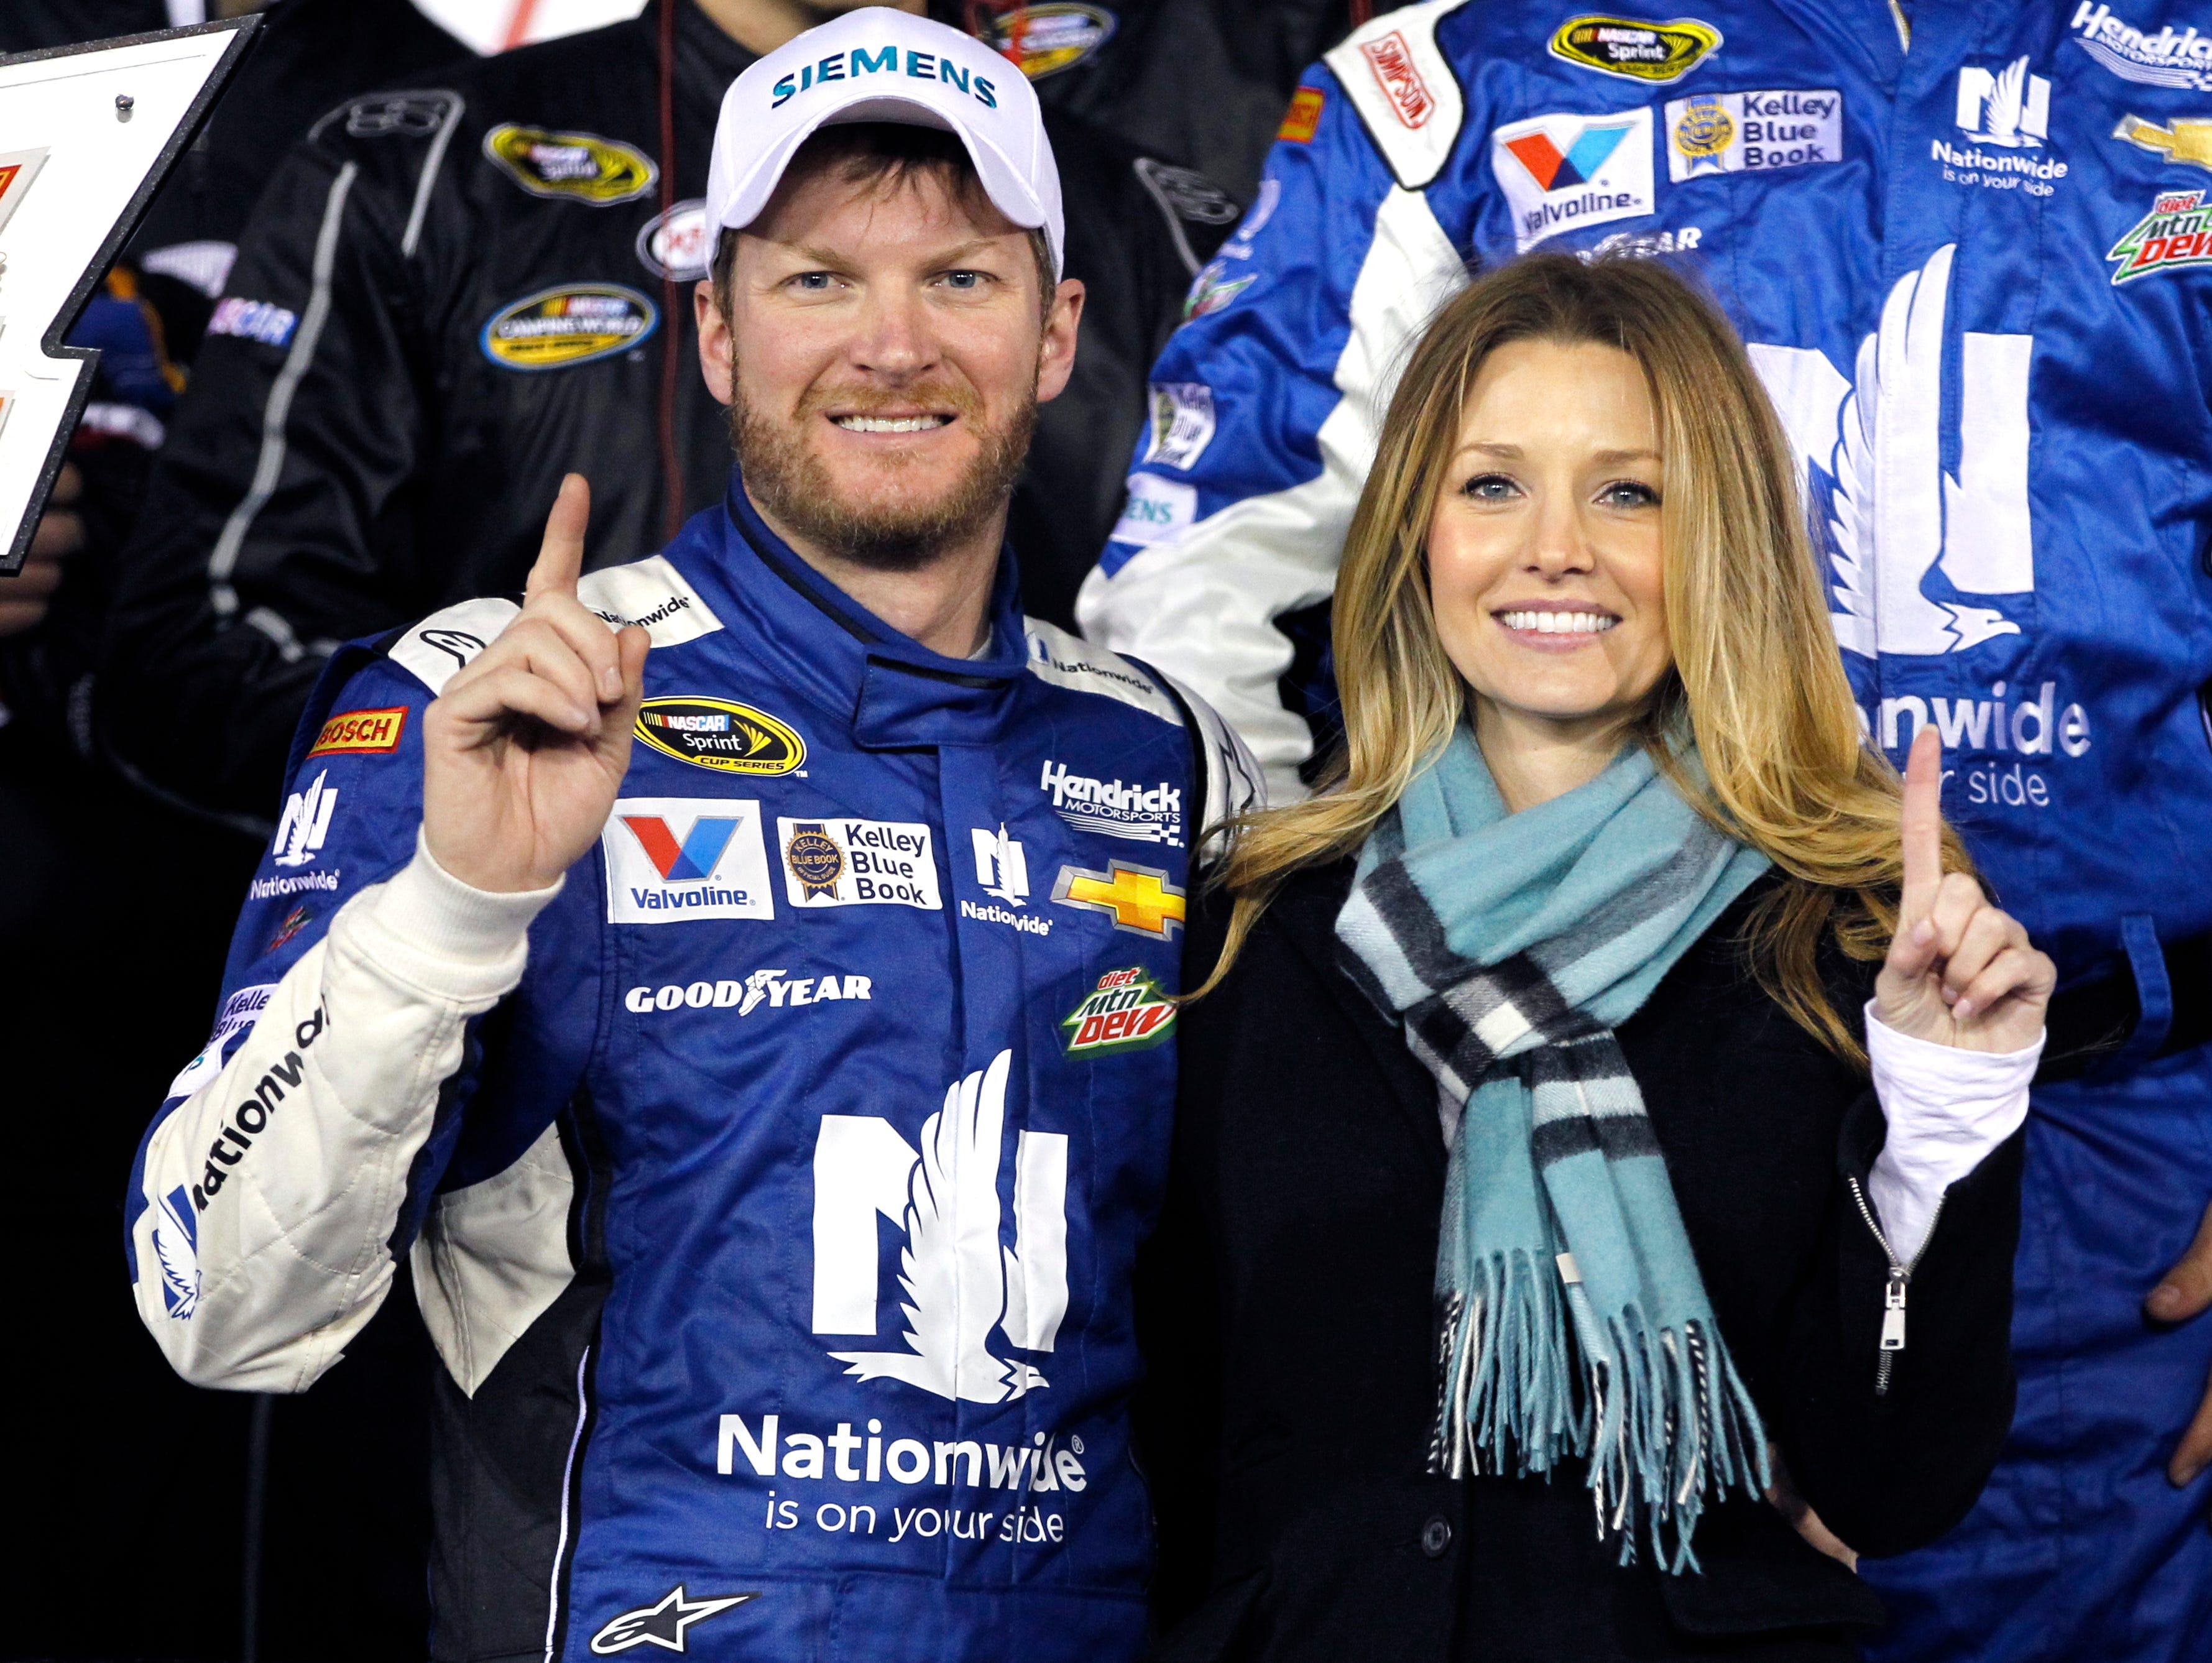 Dale Jr. engaged to former UK cheerleader | USA TODAY Sports3558 x 2675